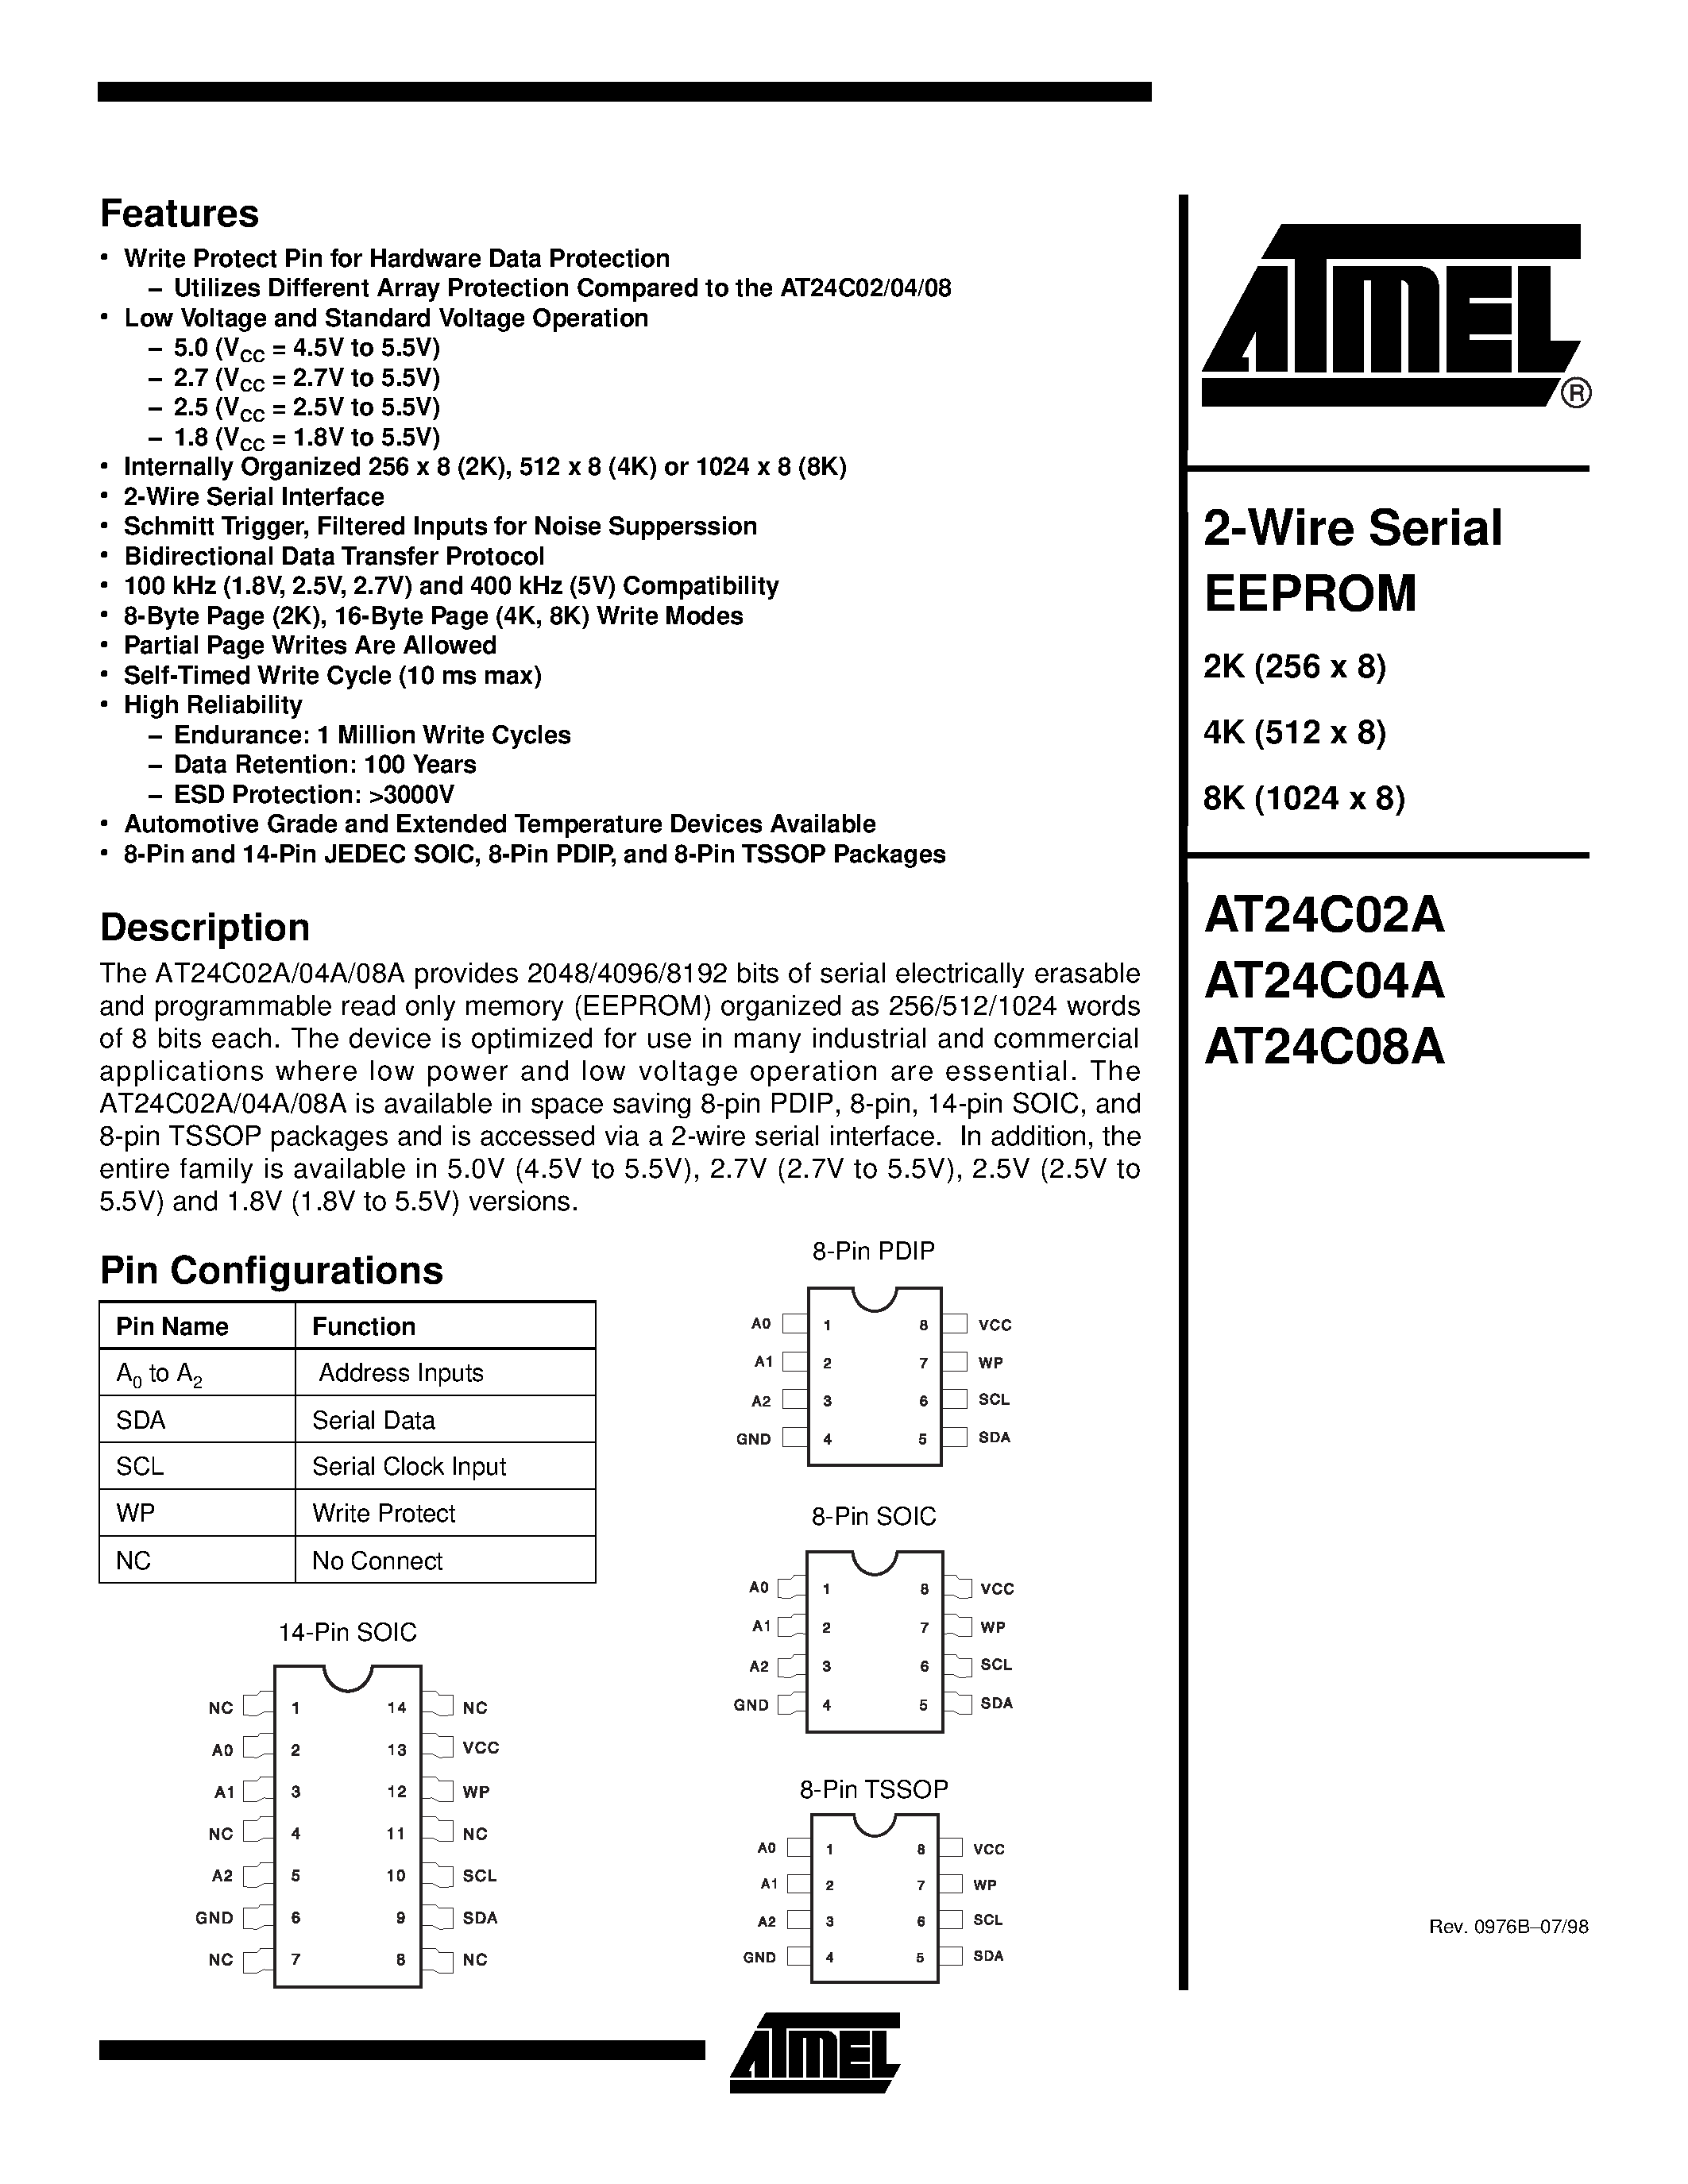 Datasheet AT24C08A-10PC-2.5 - 2-Wire Serial EEPROM page 1